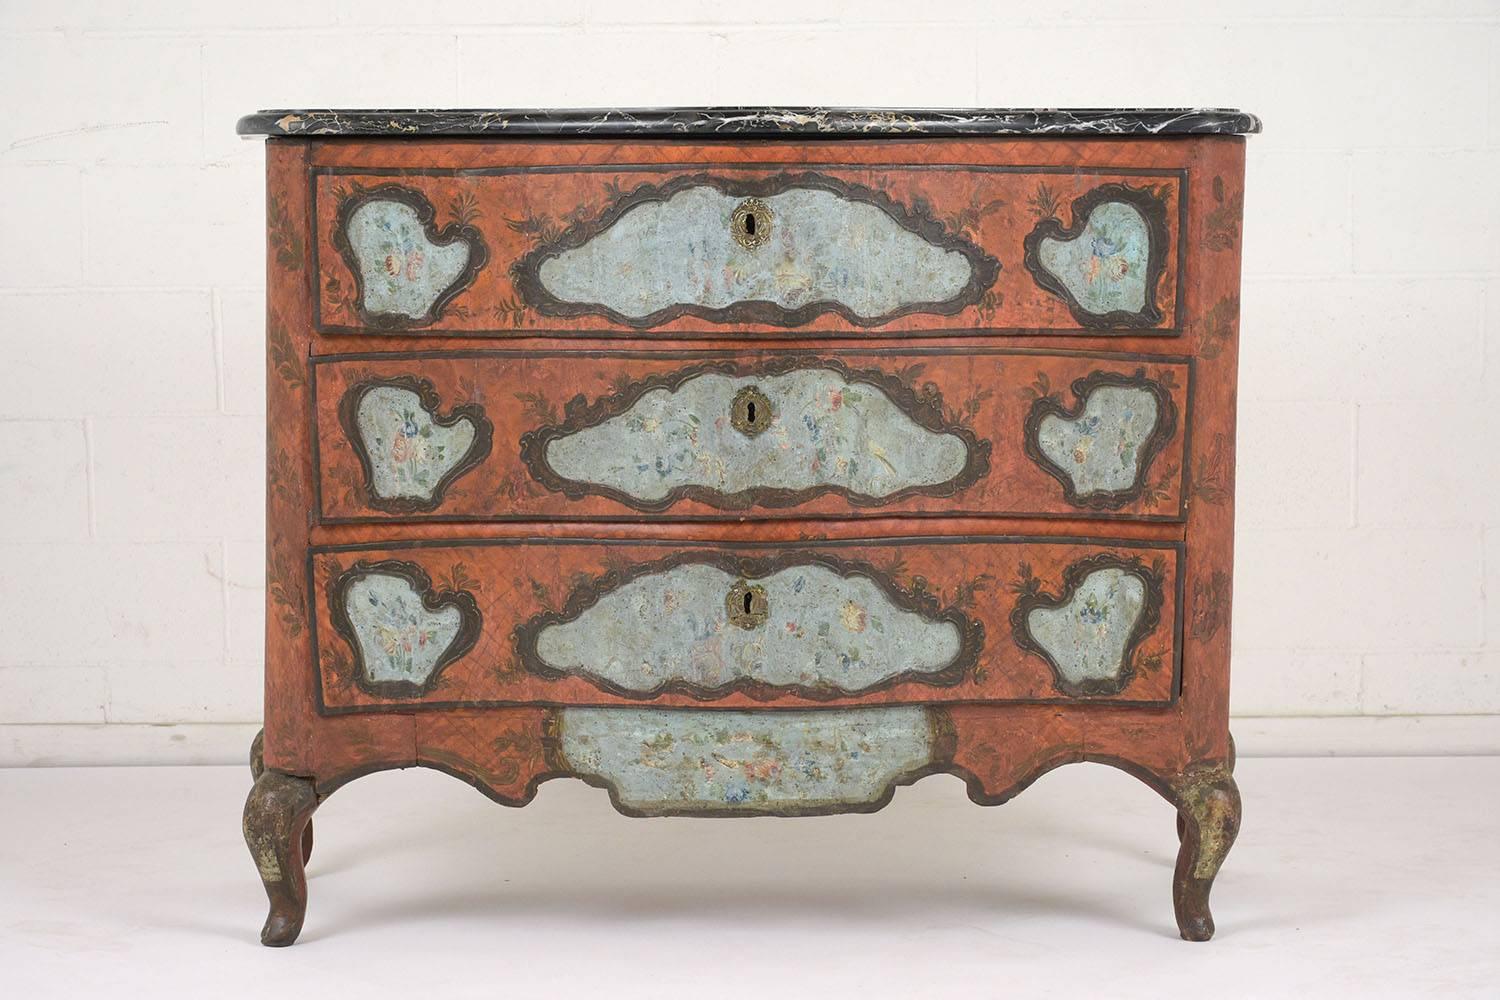 This stunning Sicilian chest of drawers dates to the late 1700s and is in remarkable condition. The chest is painted a rust orange color with a textured finish and leafy details. Adorning the sides and front are organic shaped accents of light blue